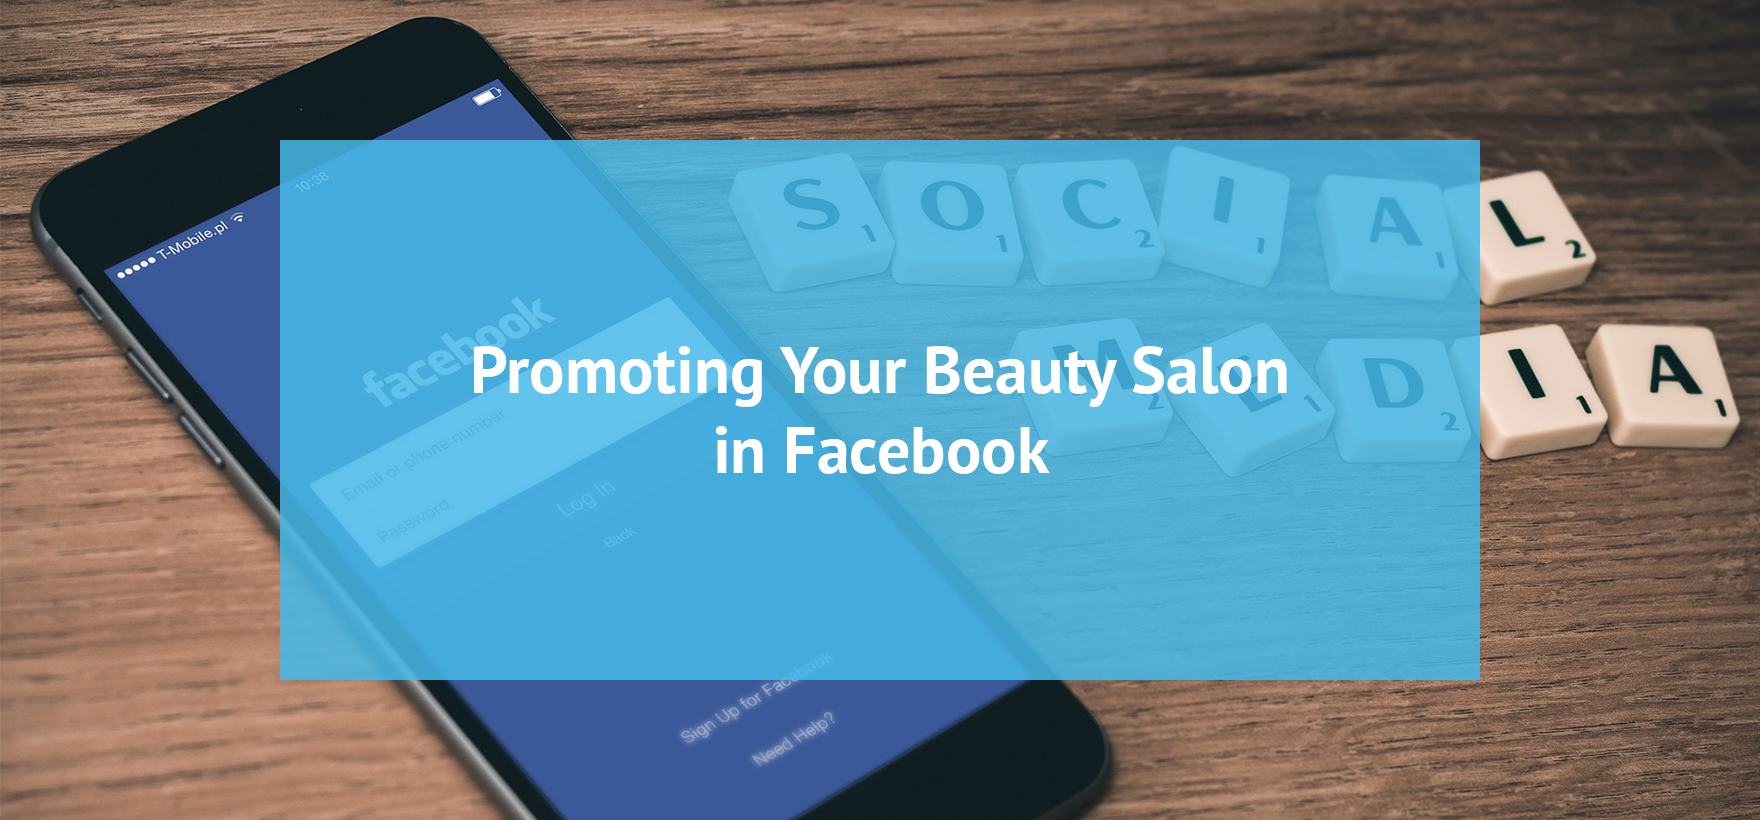 Promoting Your Beauty Salon on Facebook